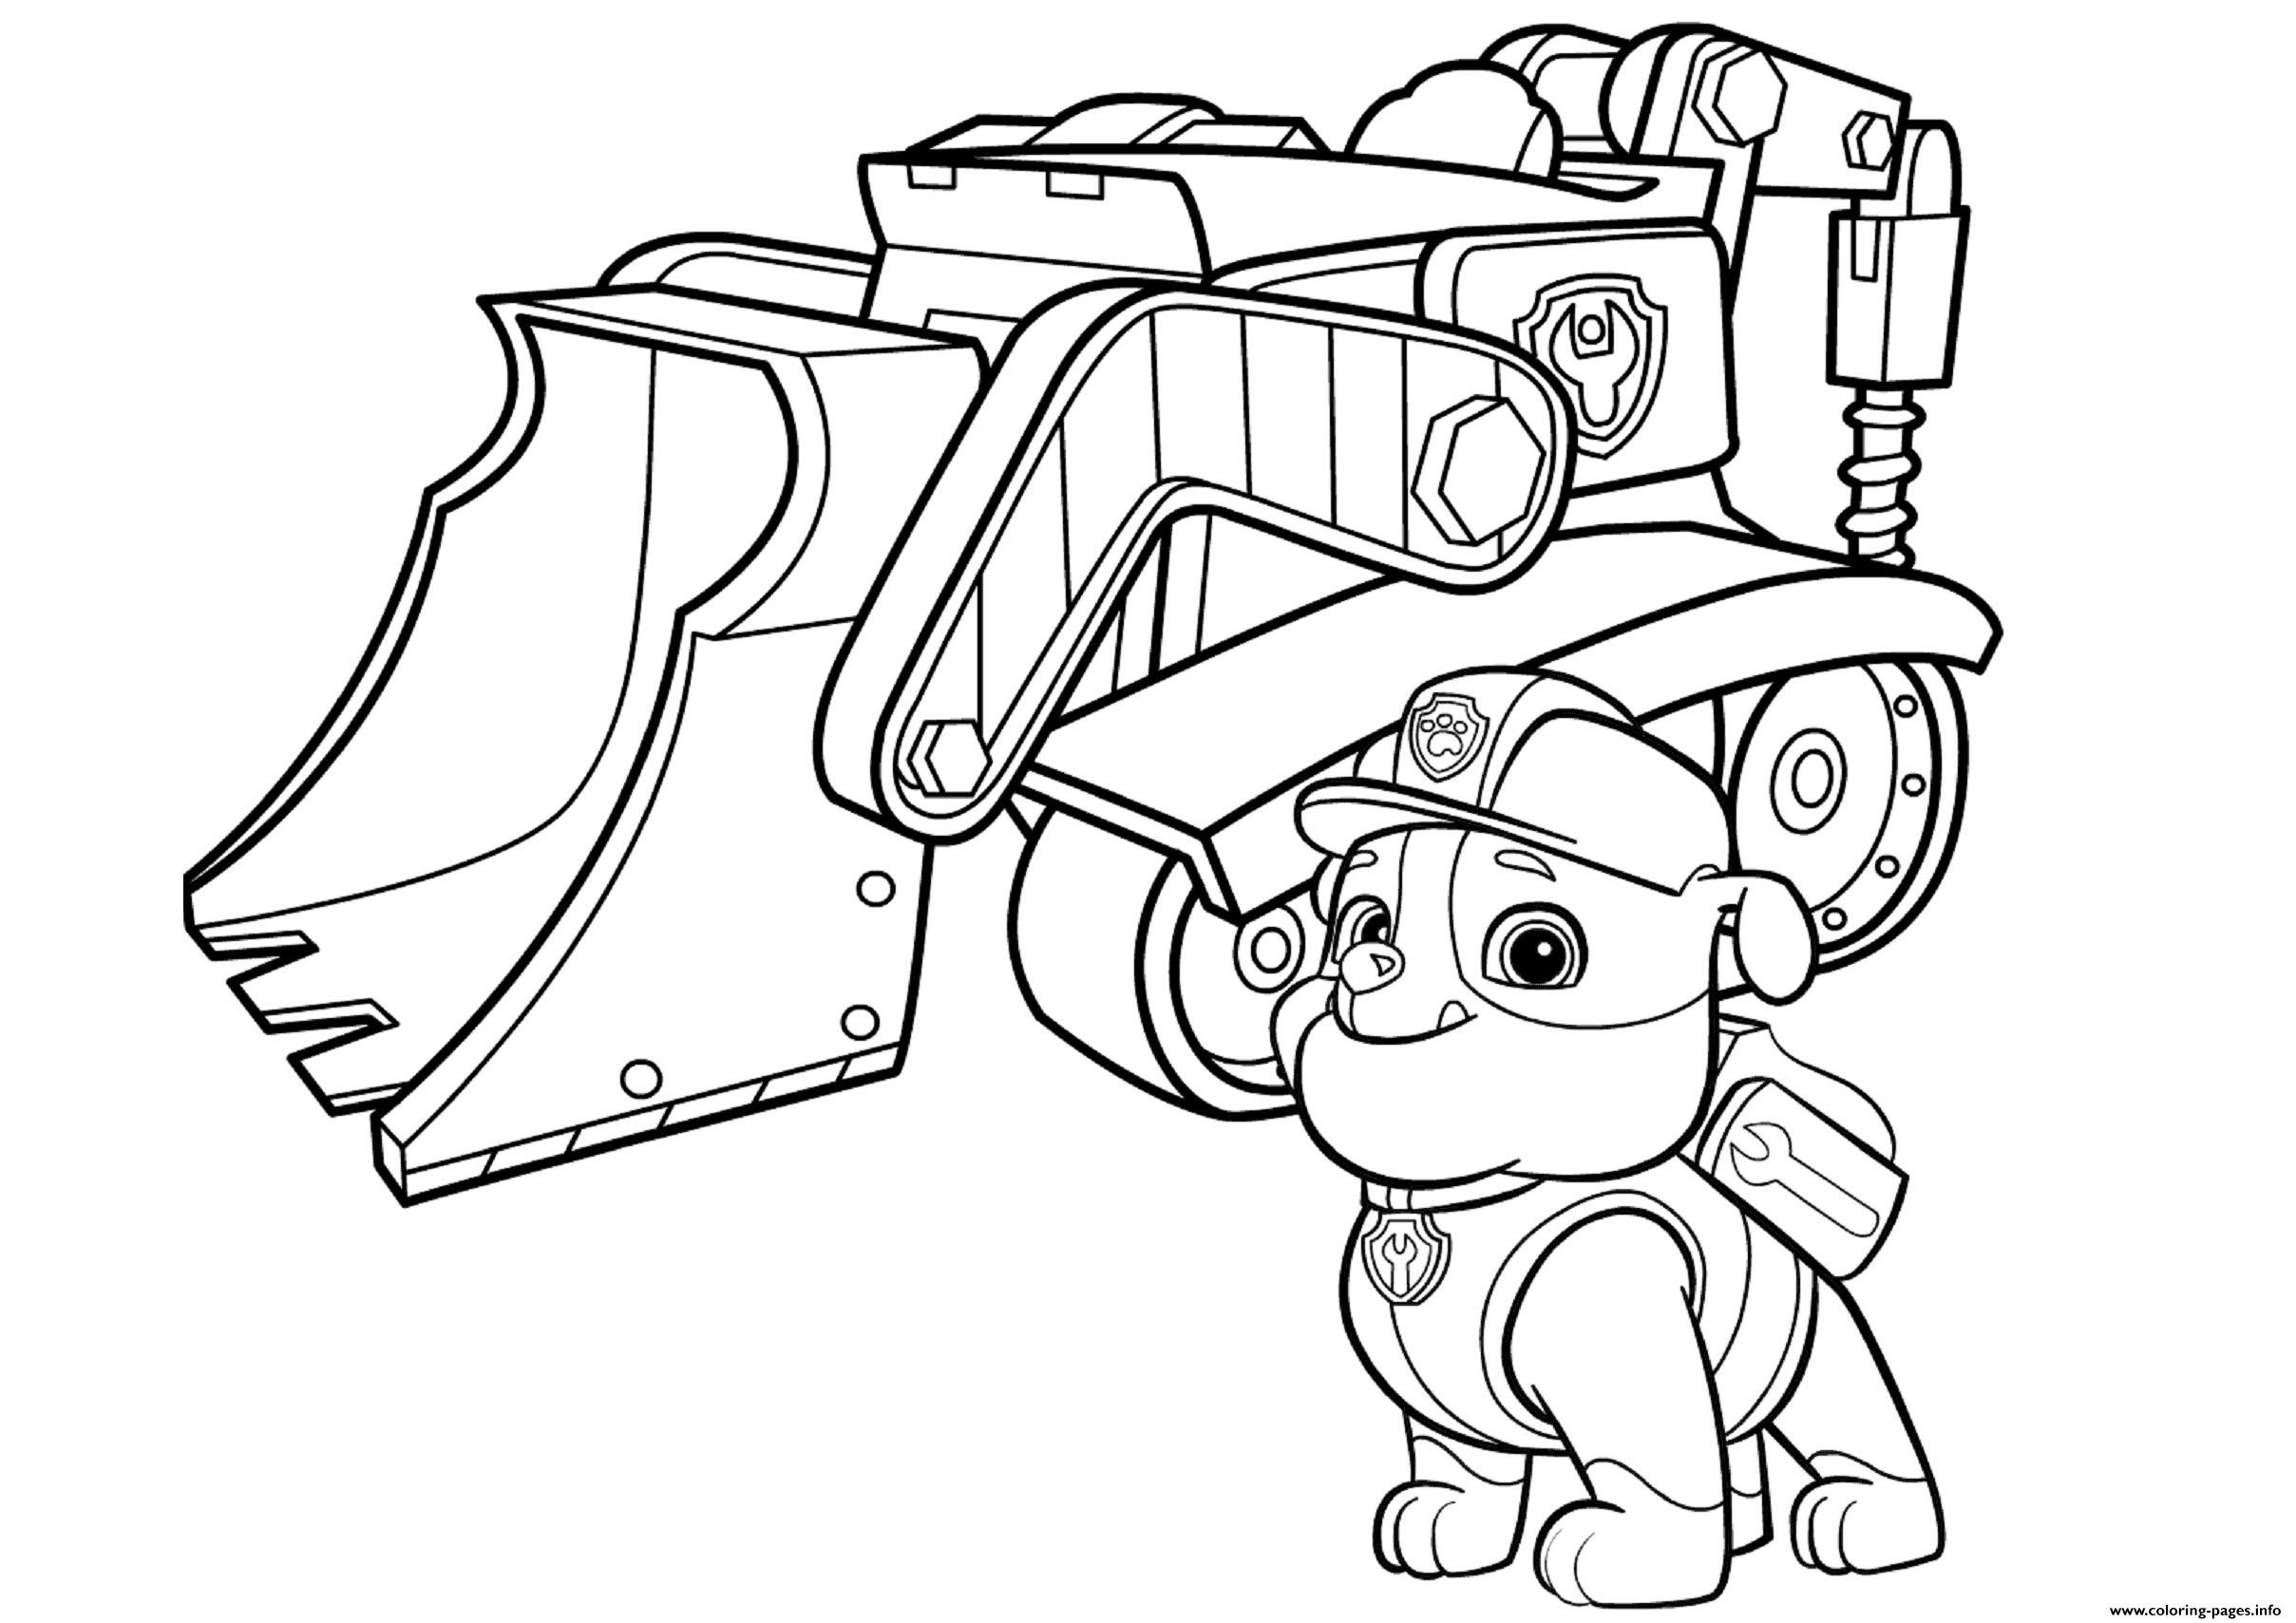 Paw Patrol Printable Coloring Sheets
 FREE PAW Patrol Coloring Pages Happiness is Homemade